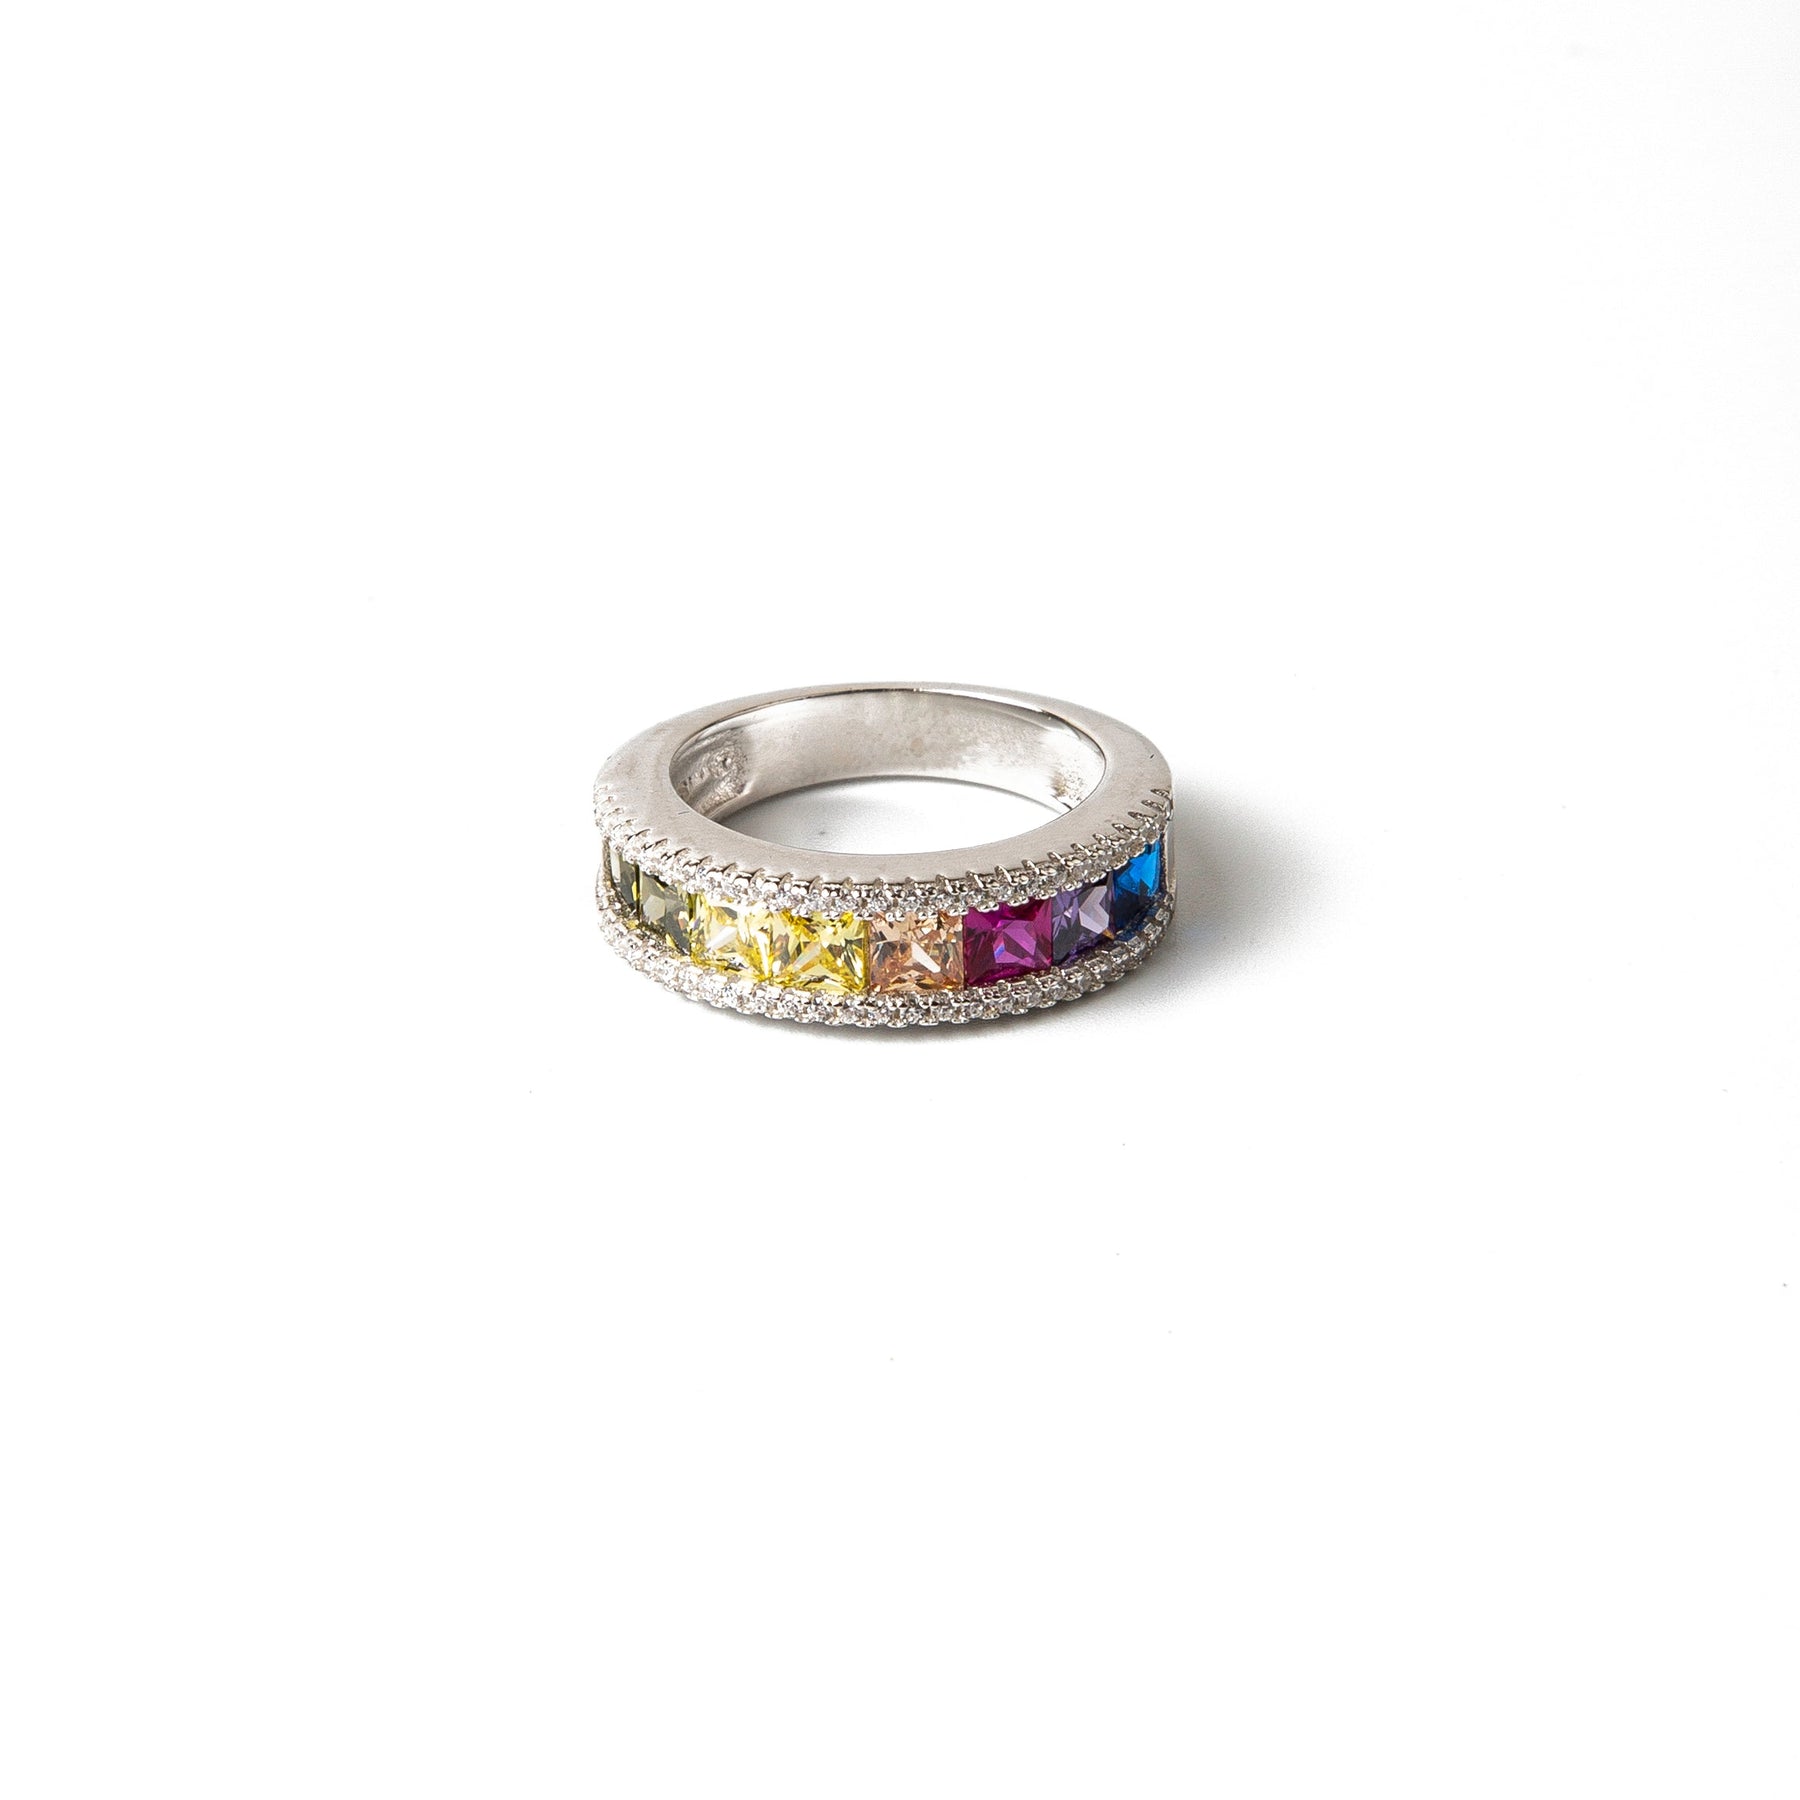 The Cz Periphery Rainbow Wide Band Ring